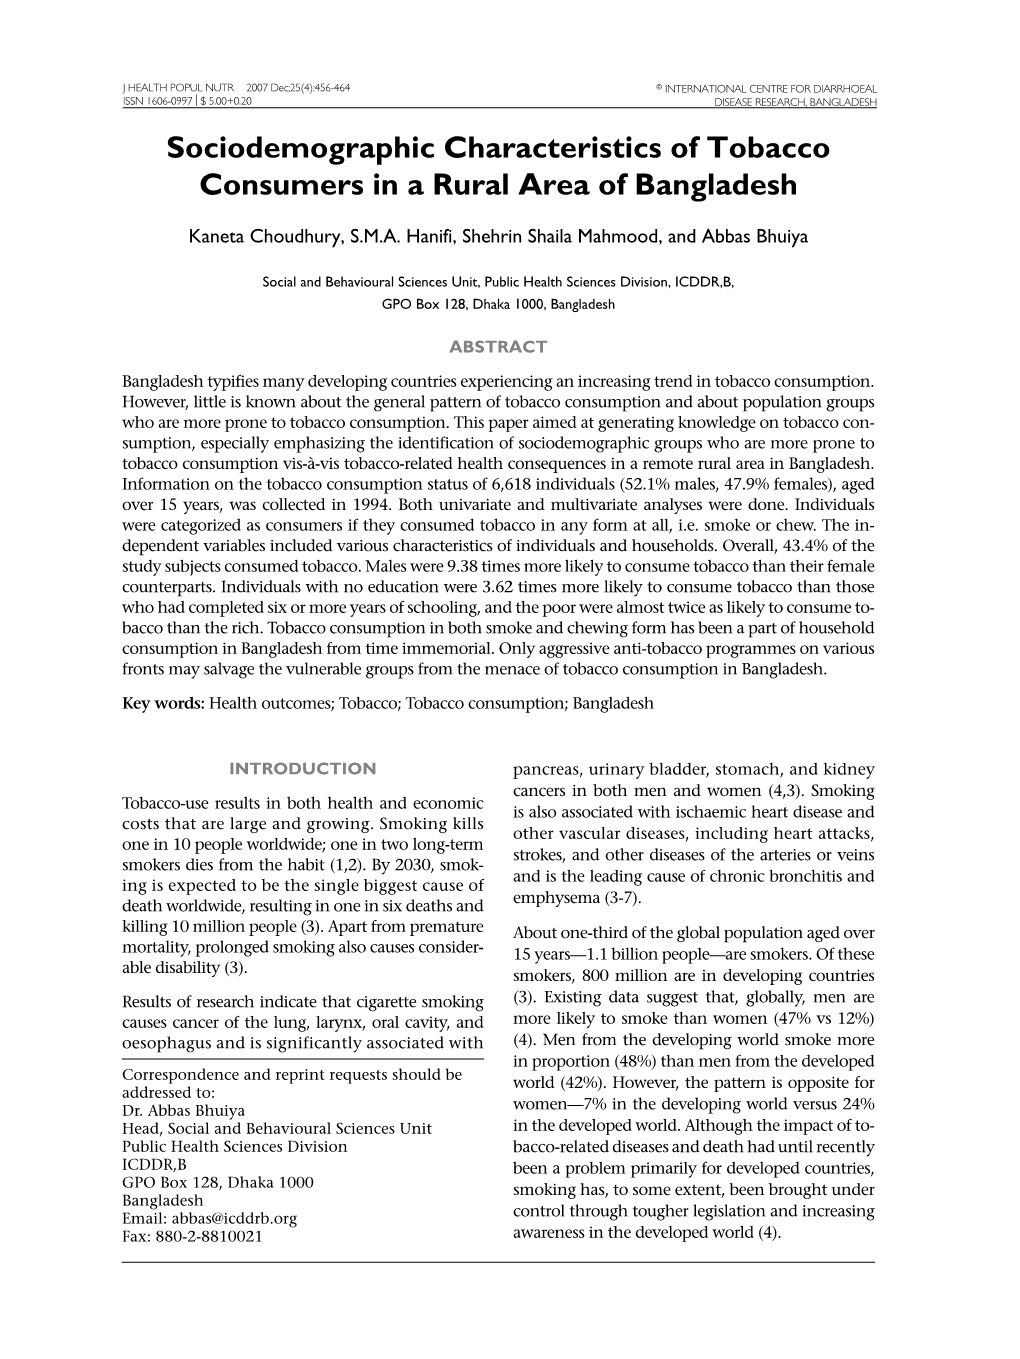 Sociodemographic Characteristics of Tobacco Consumers in a Rural Area of Bangladesh